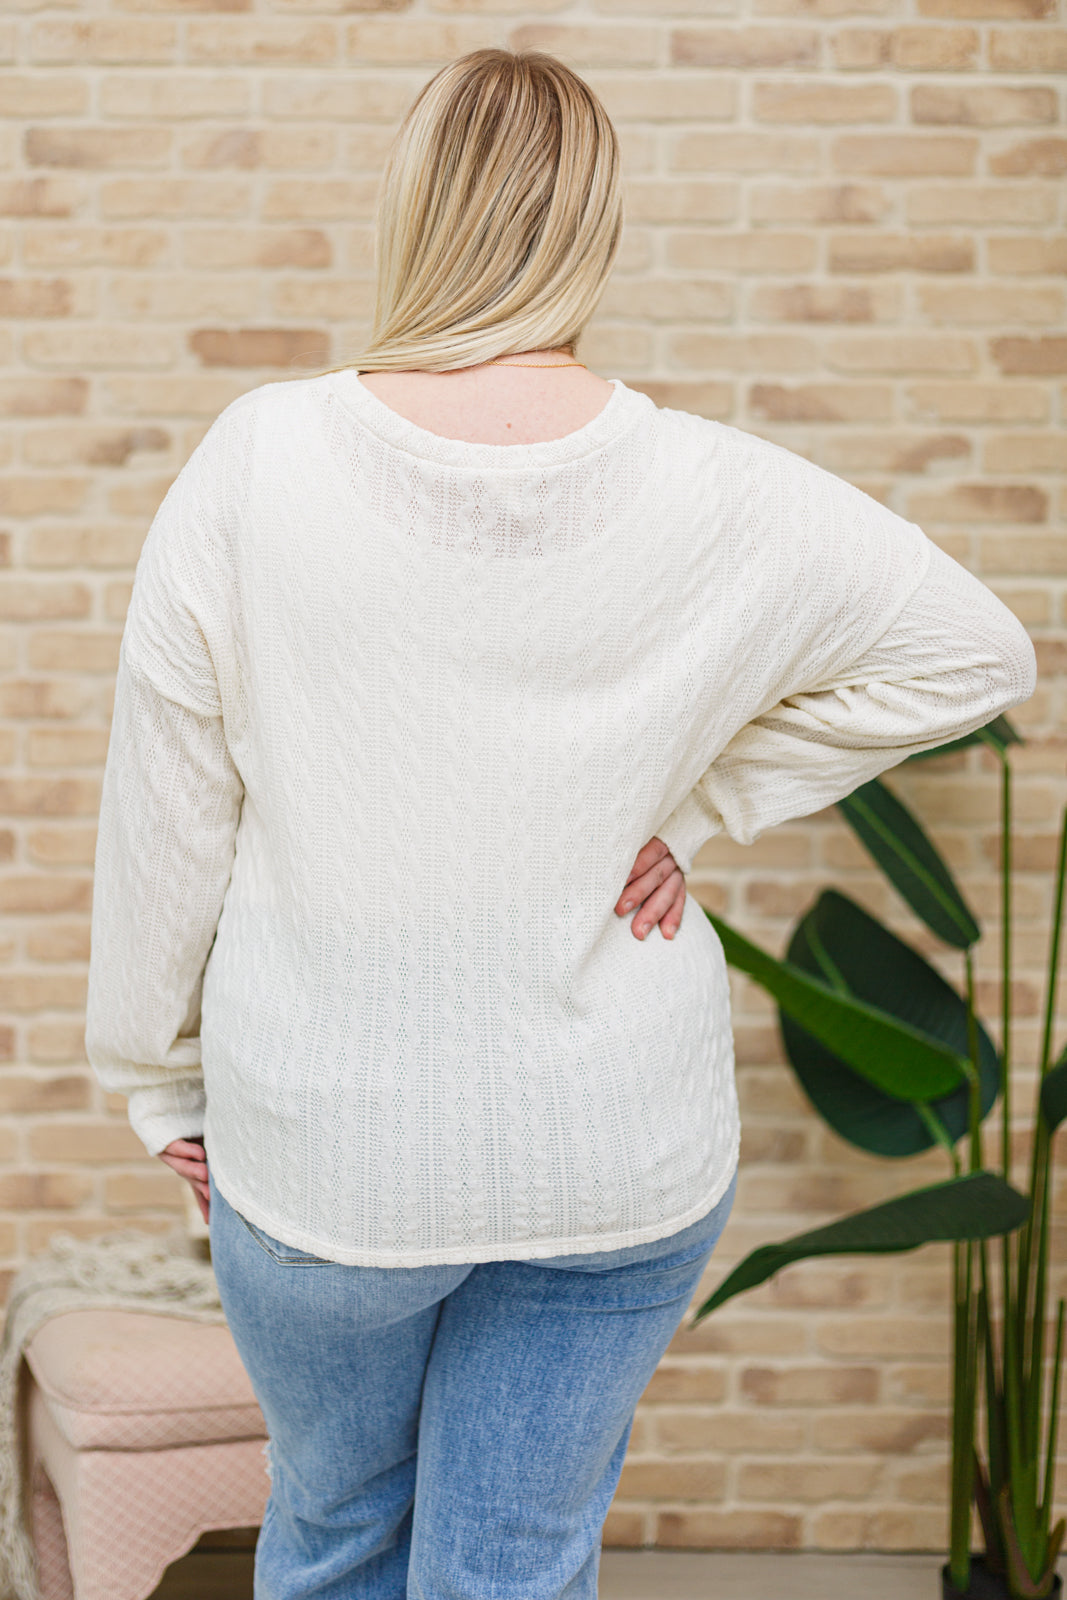 Keep Me Here Knit Sweater in Cream - FamFancy Boutique